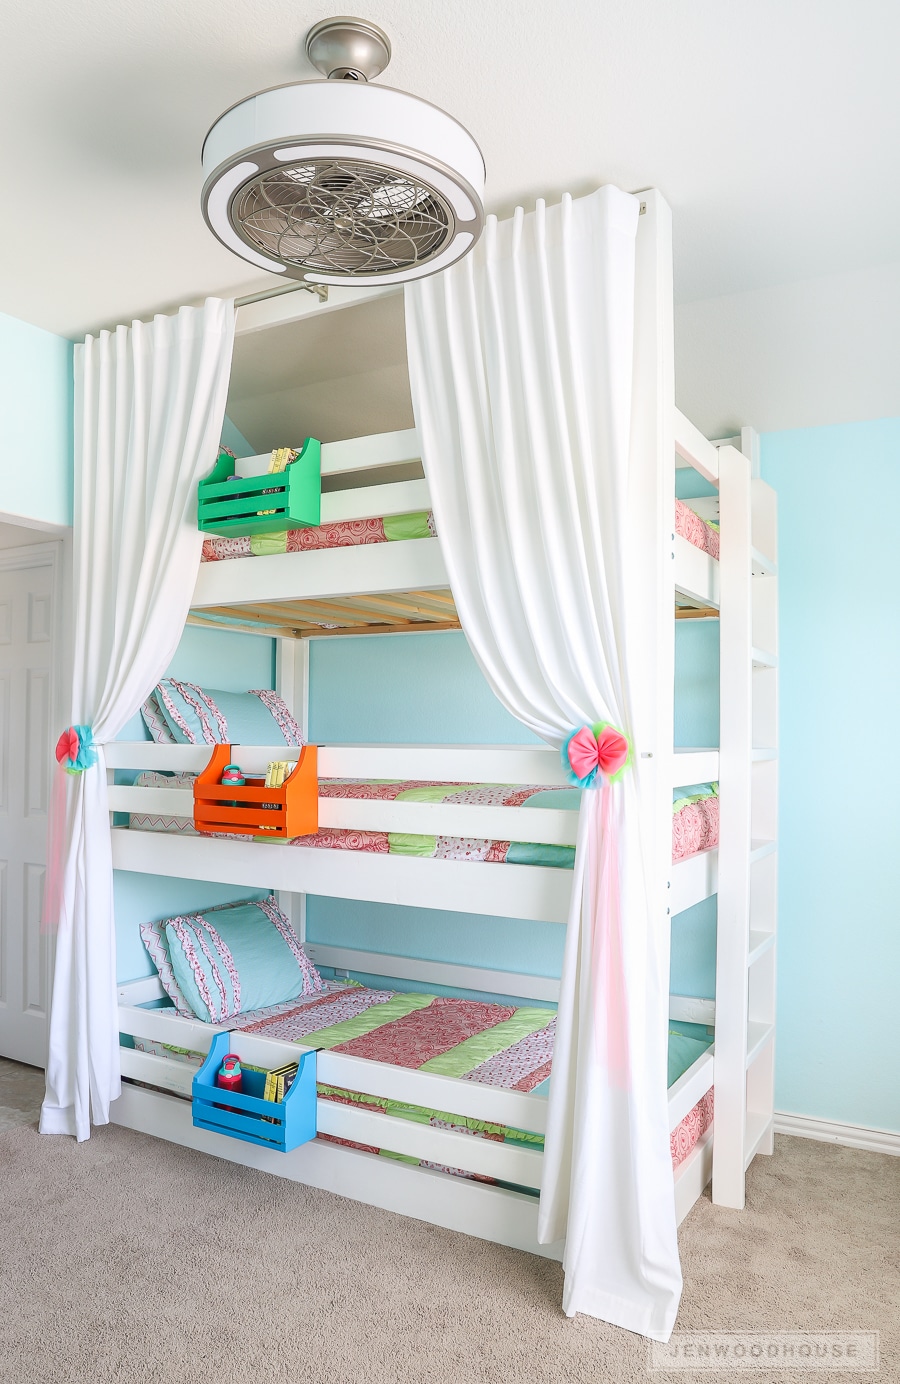 How To Build A Diy Triple Bunk Bed, 3 Story Bunk Bed